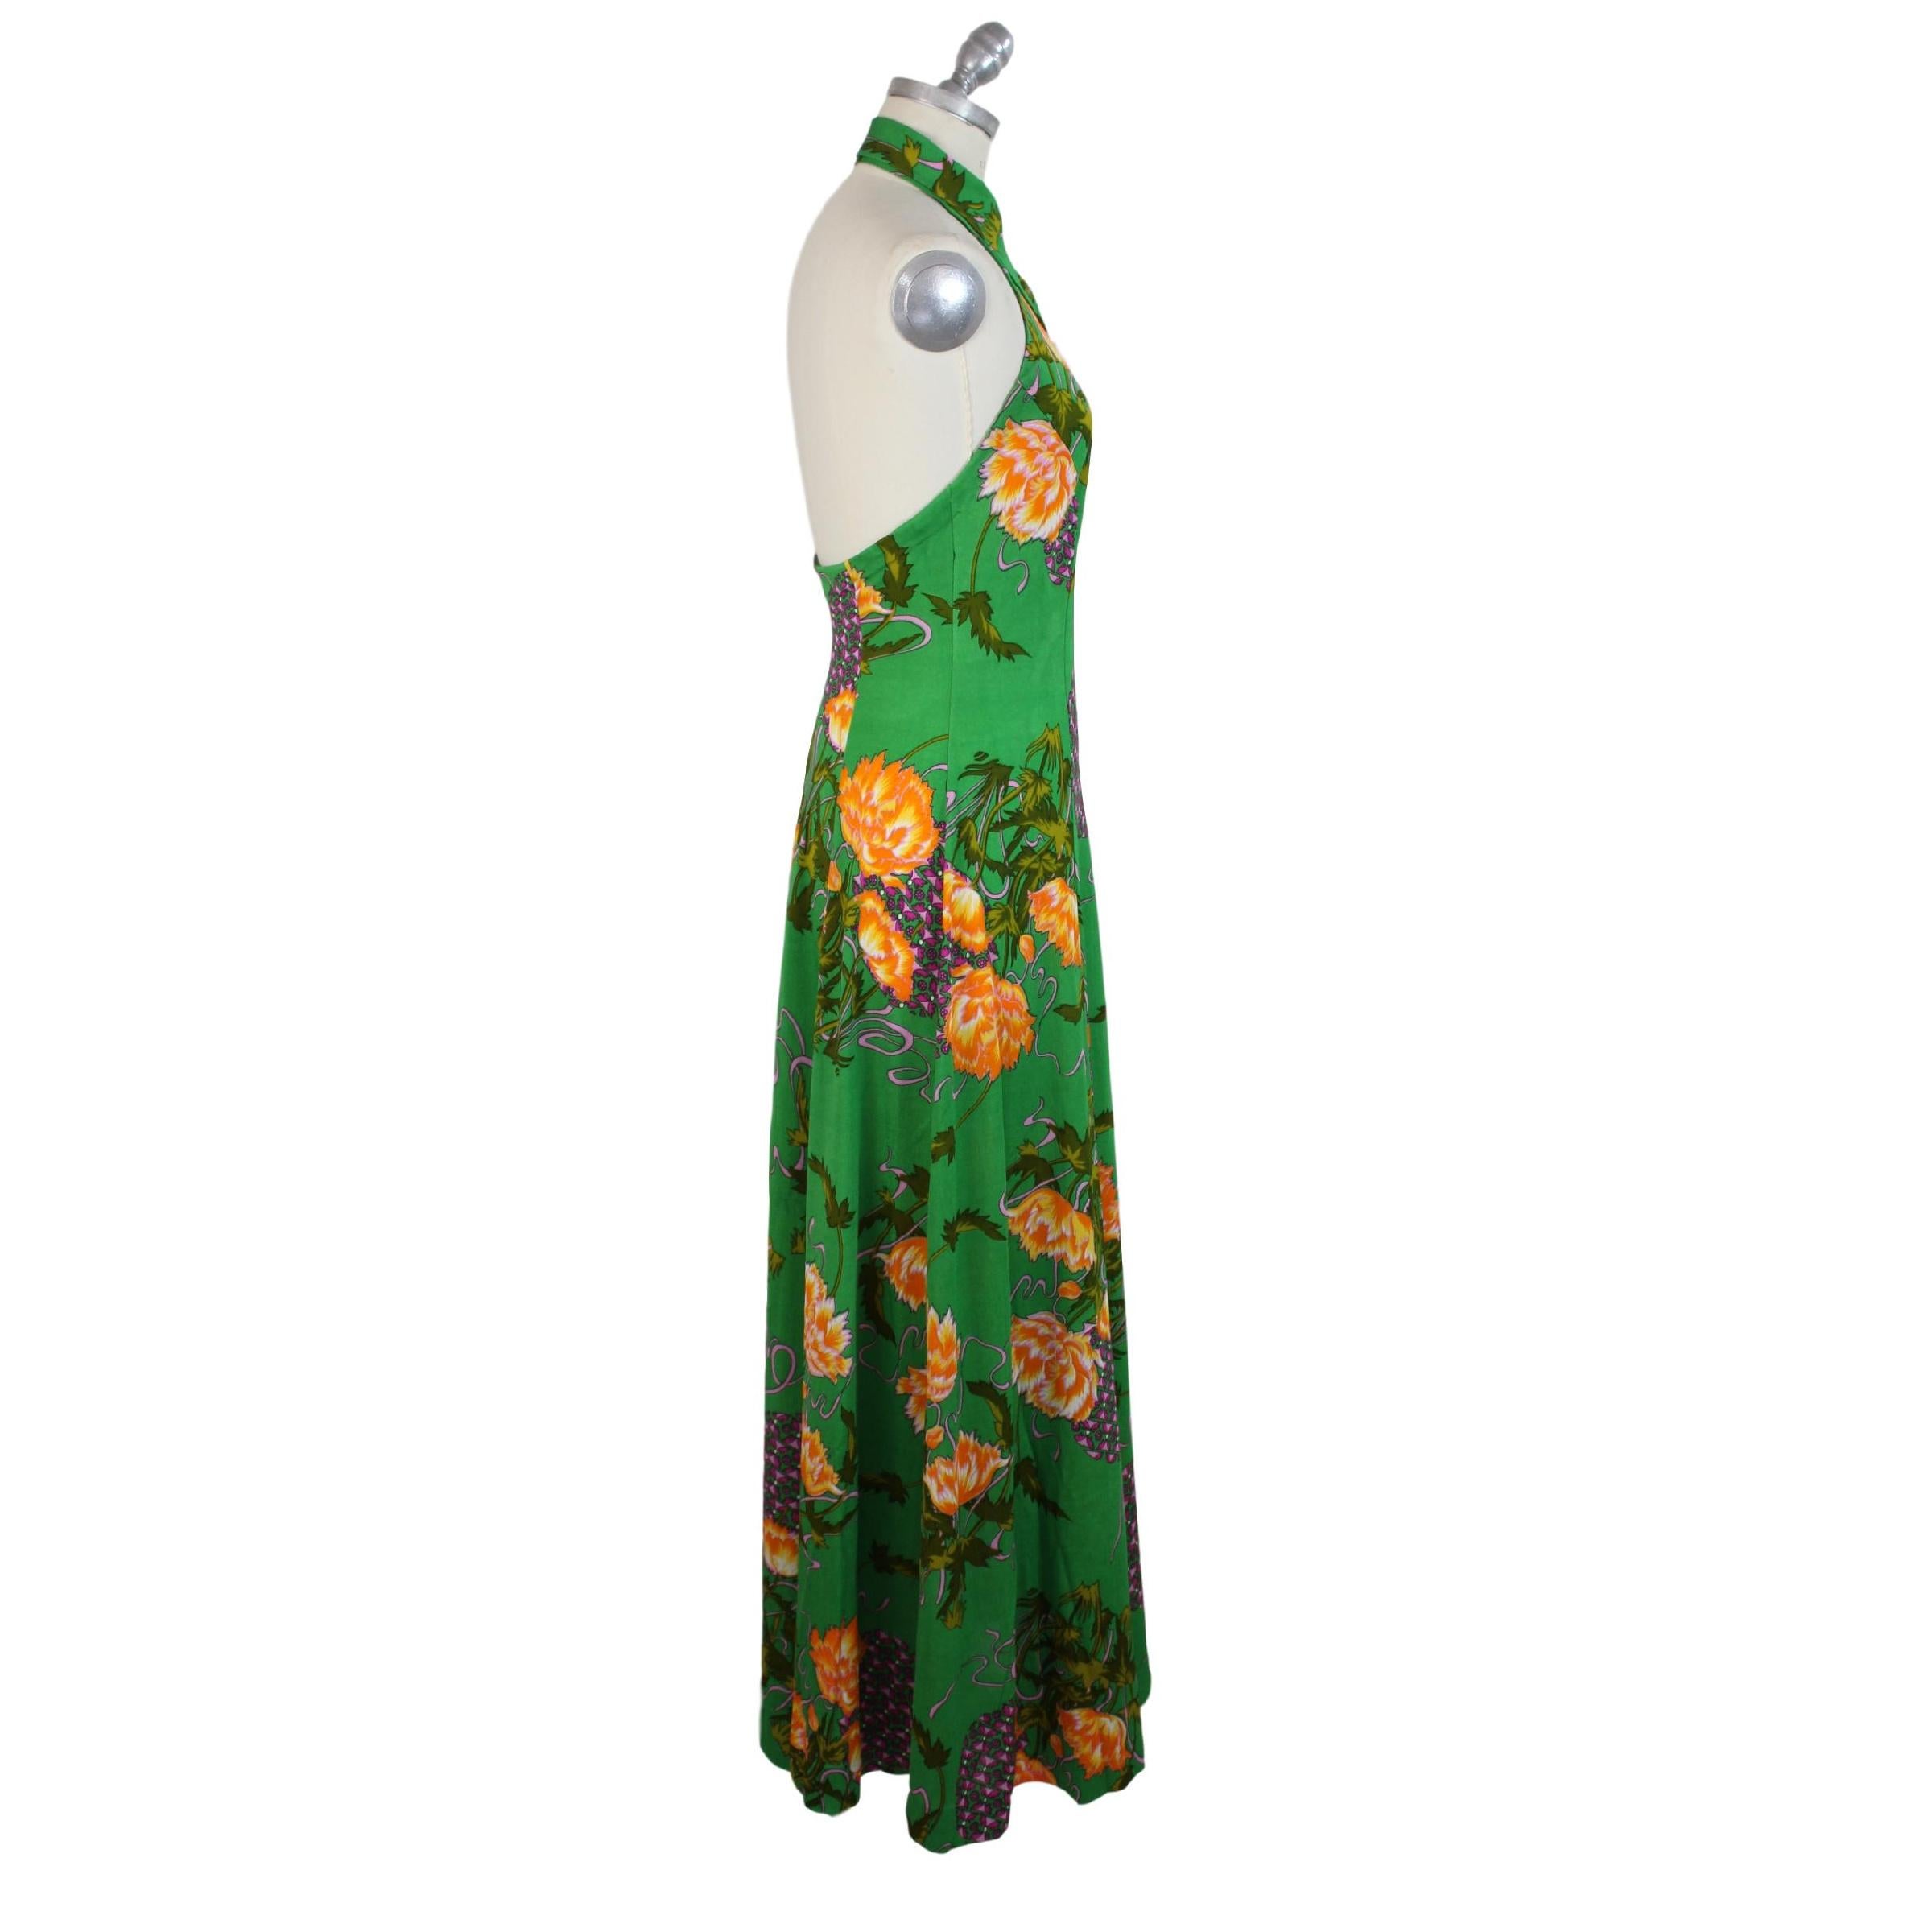 Vintage Floral Green Long Cocktail Handmade Dress 1980s In Excellent Condition For Sale In Brindisi, Bt